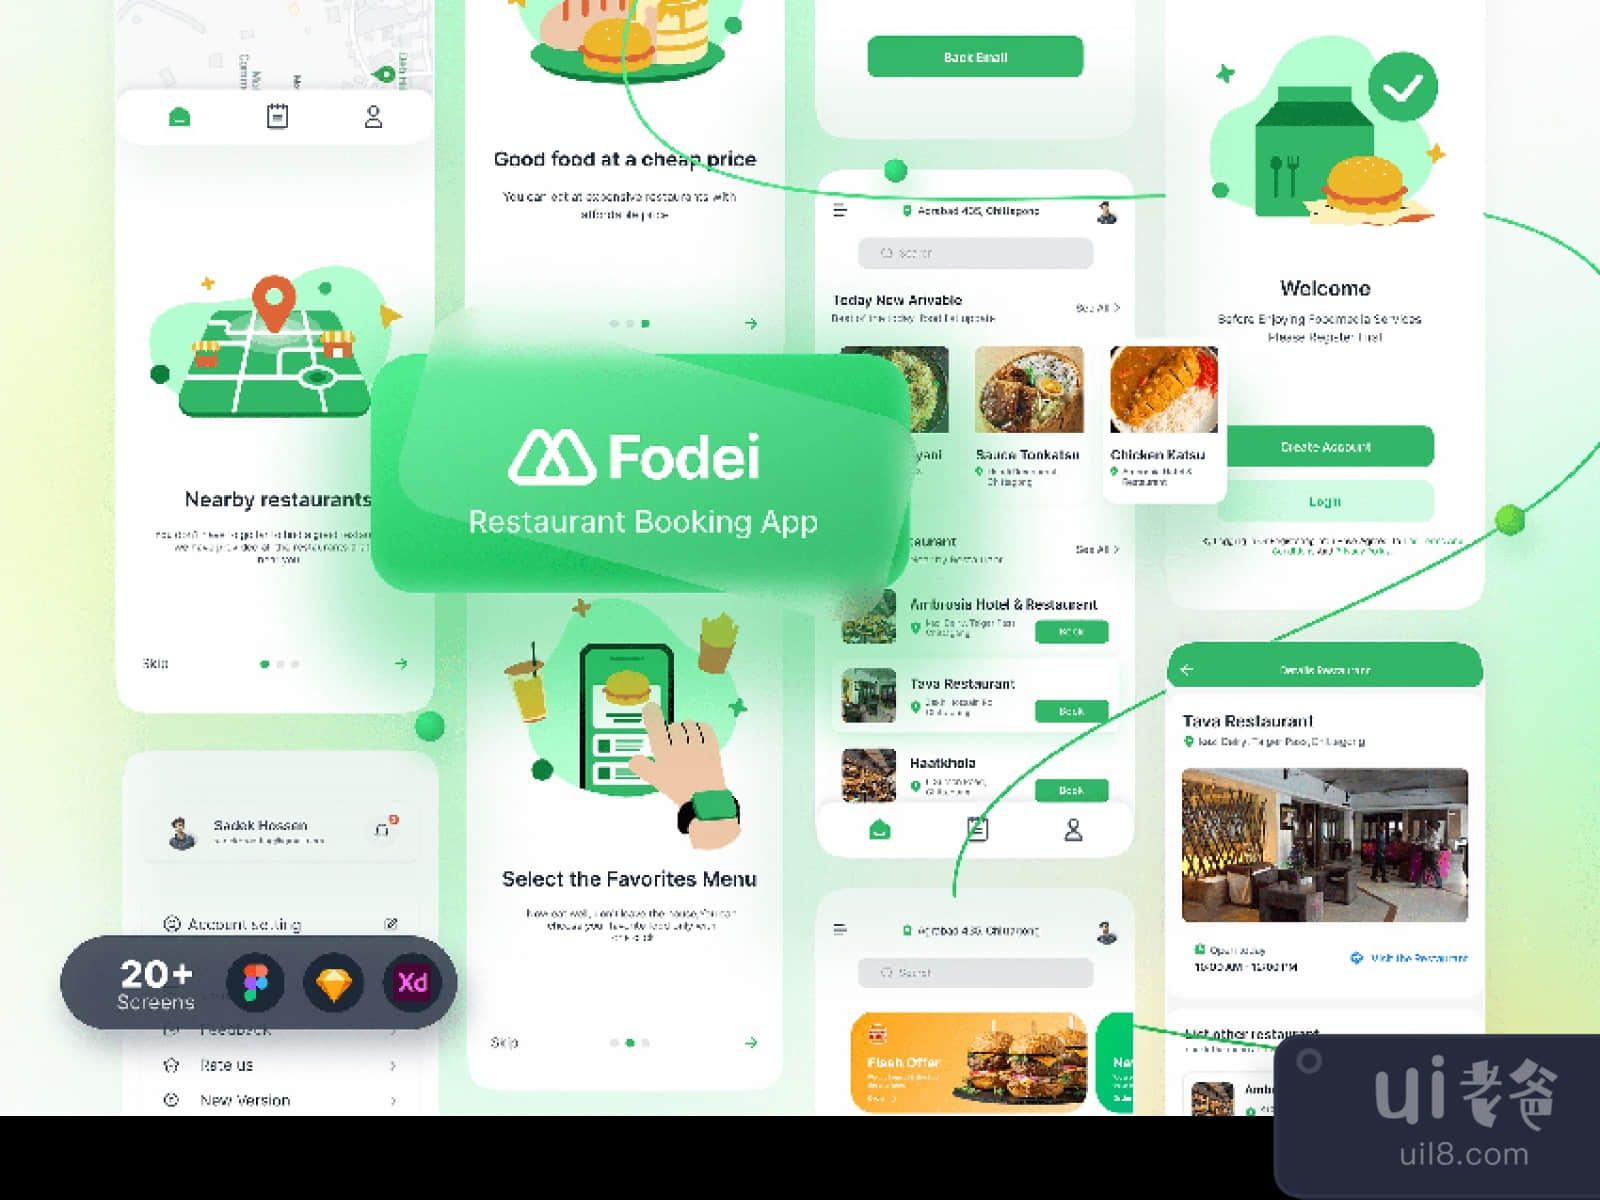 20+ Screens Booking App for Figma and Adobe XD No 1